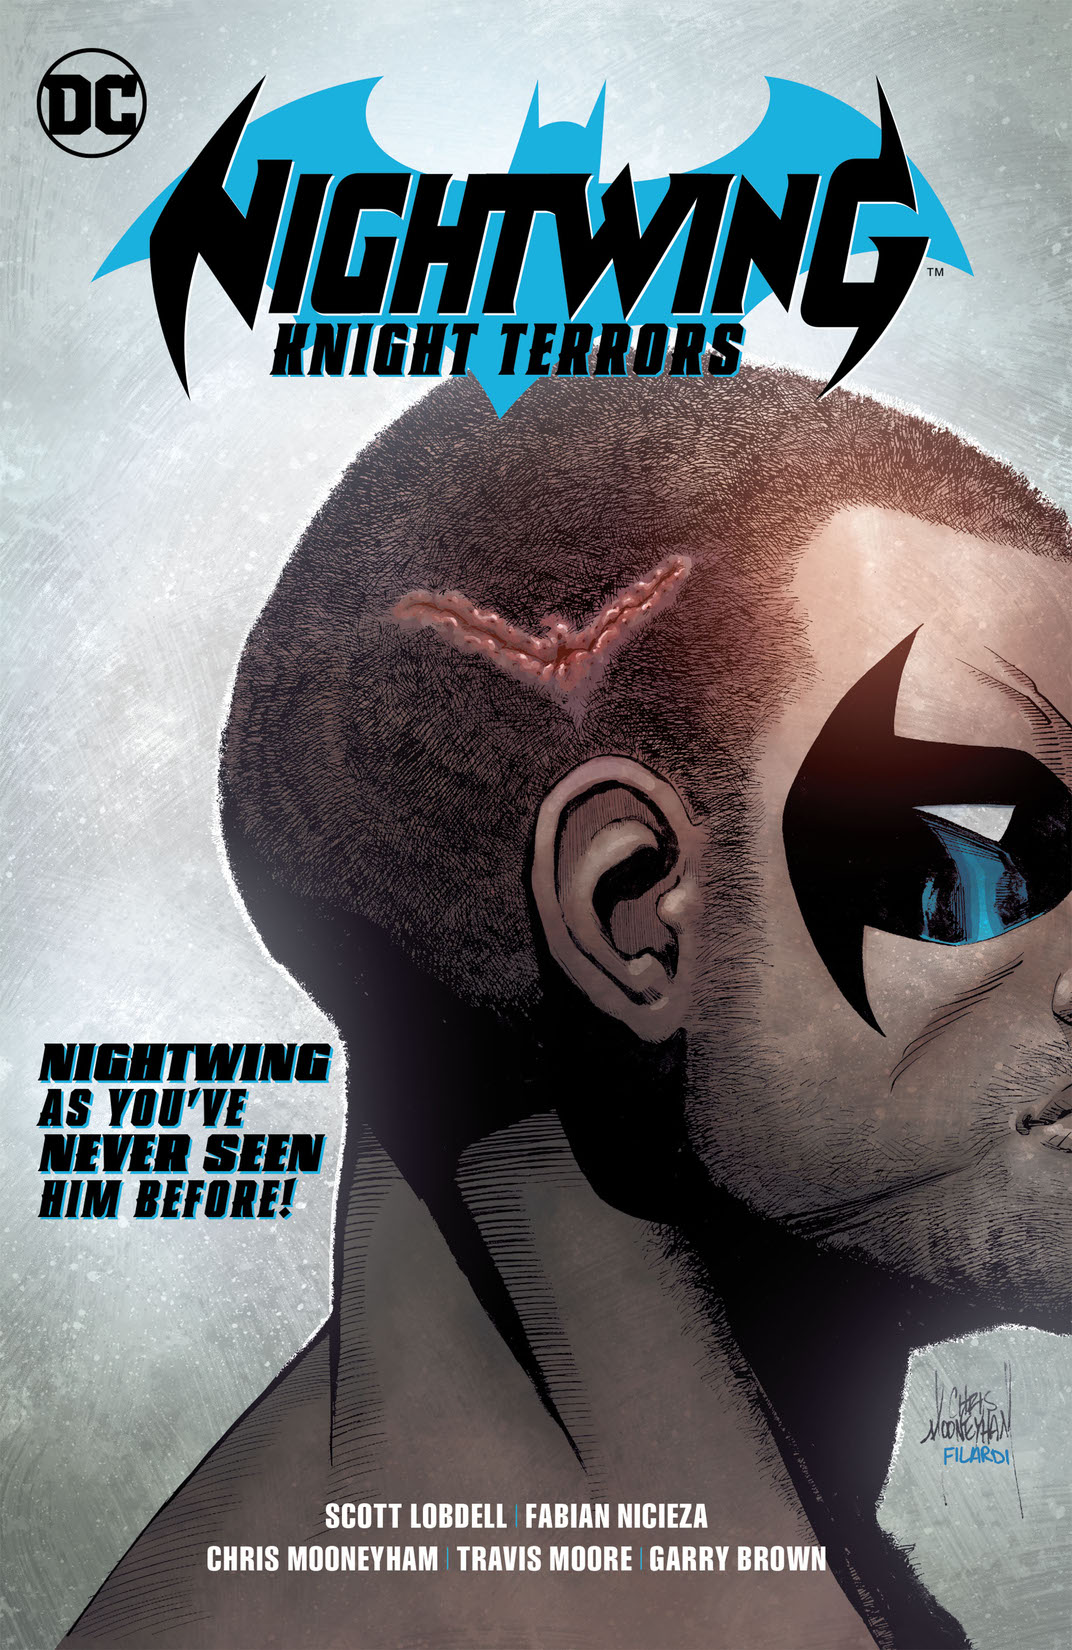 Nightwing: Knight Terrors preview images